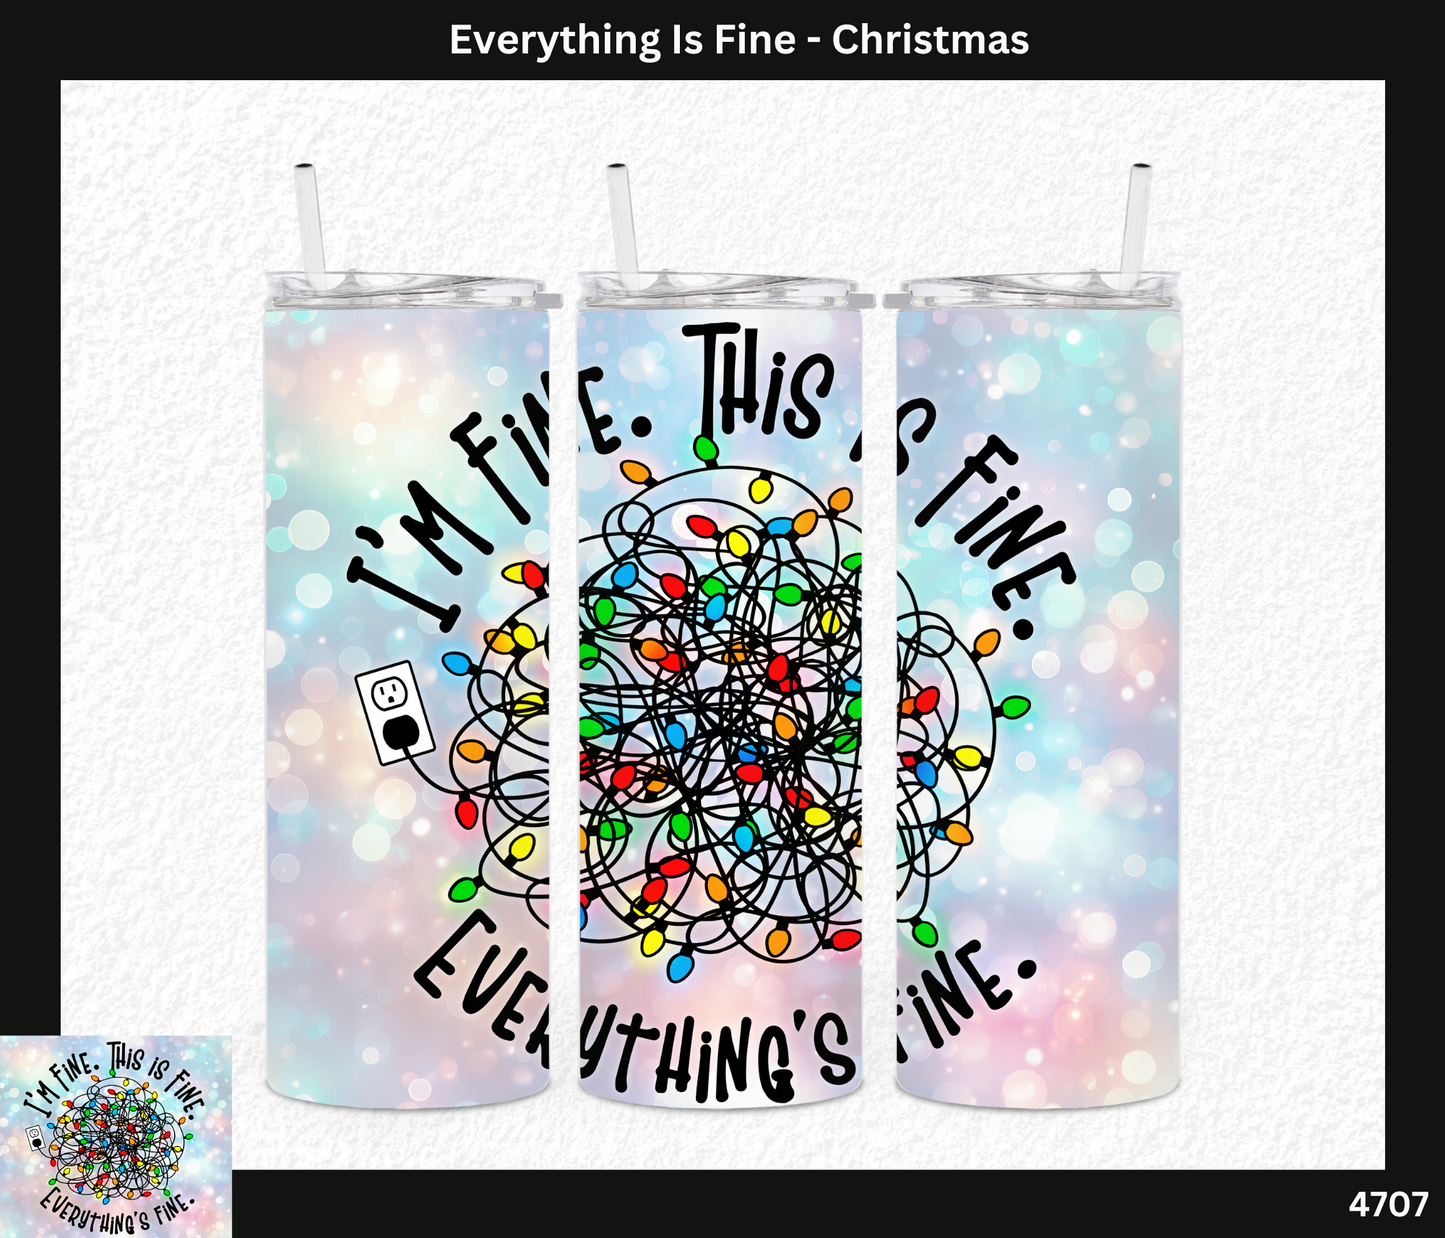 Everything is Fine - Christmas